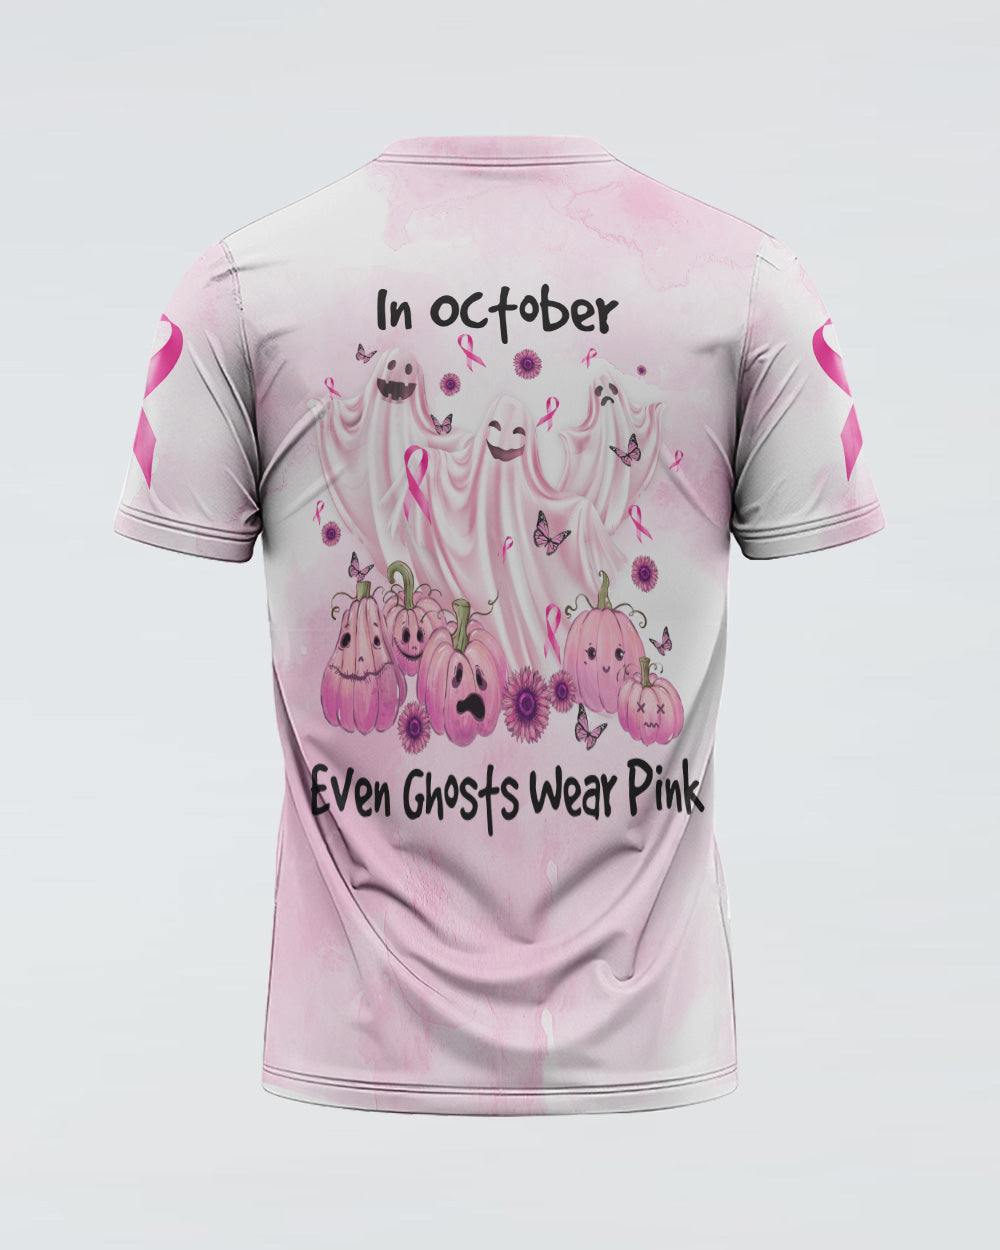 In October Even Ghosts Wear Pink Women's Breast Cancer Awareness Tshirt